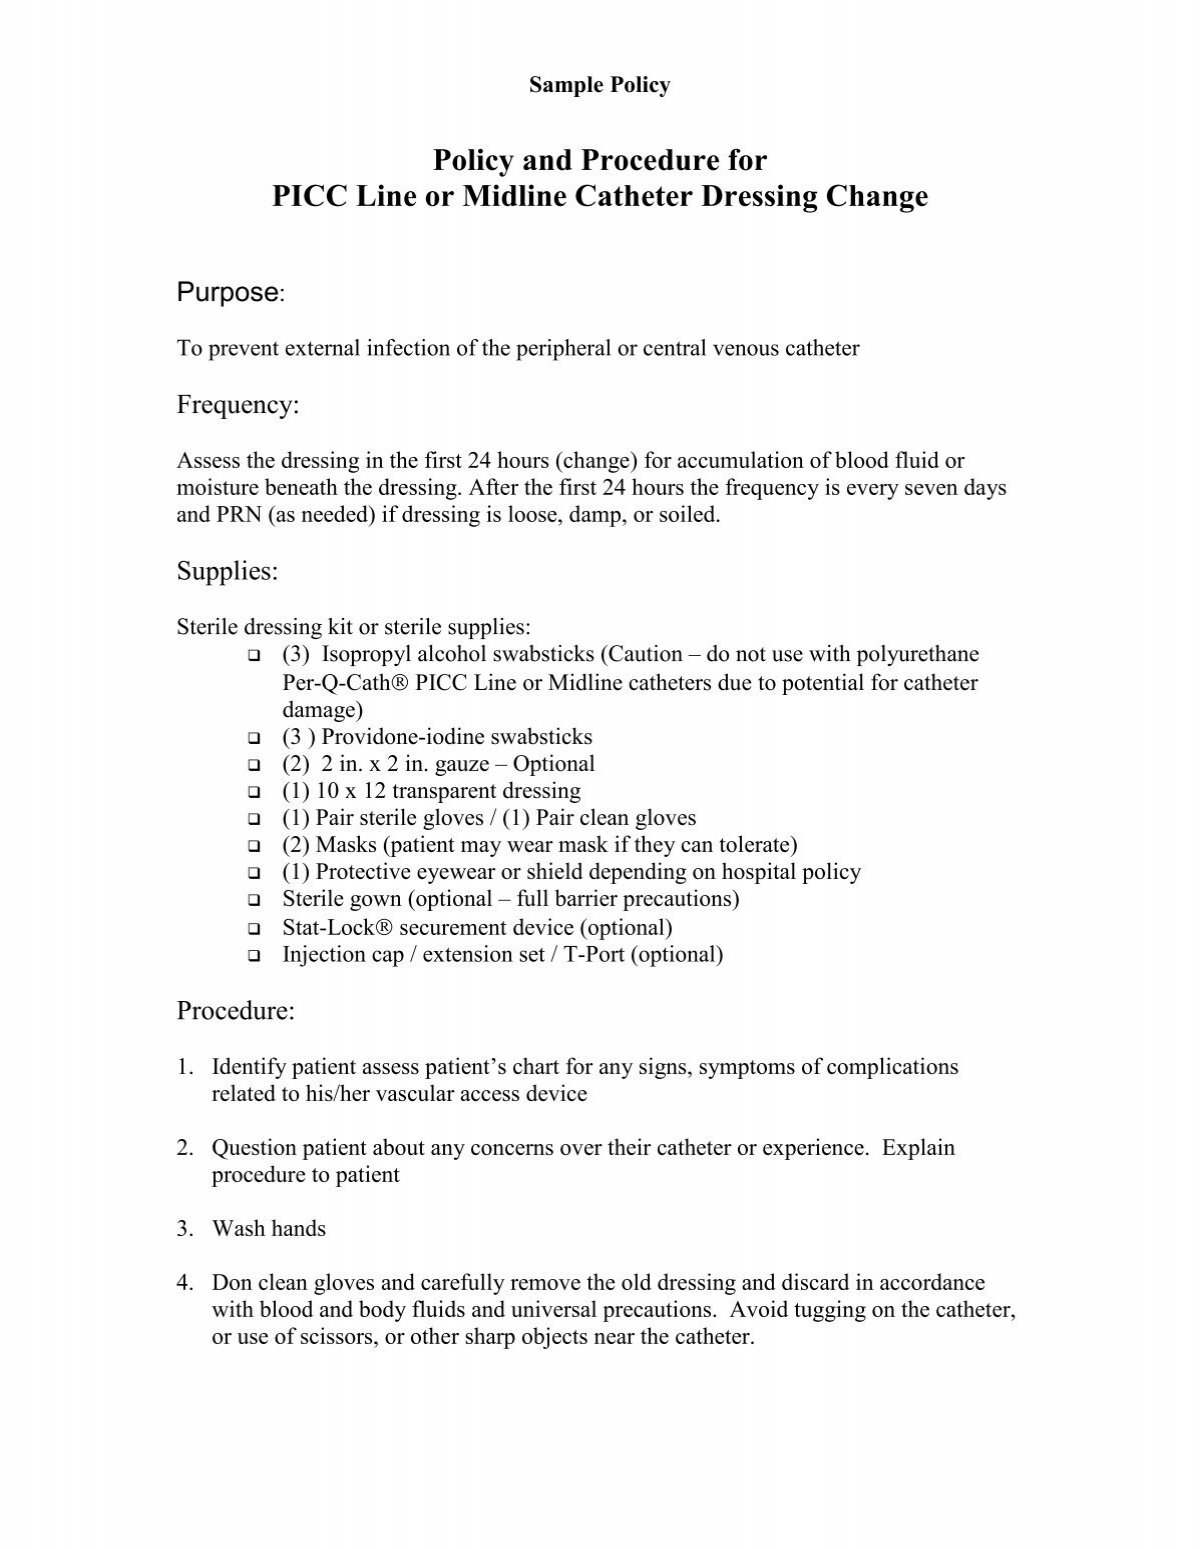 Policy and Procedure for PICC Line or Midline Catheter IV Therapy